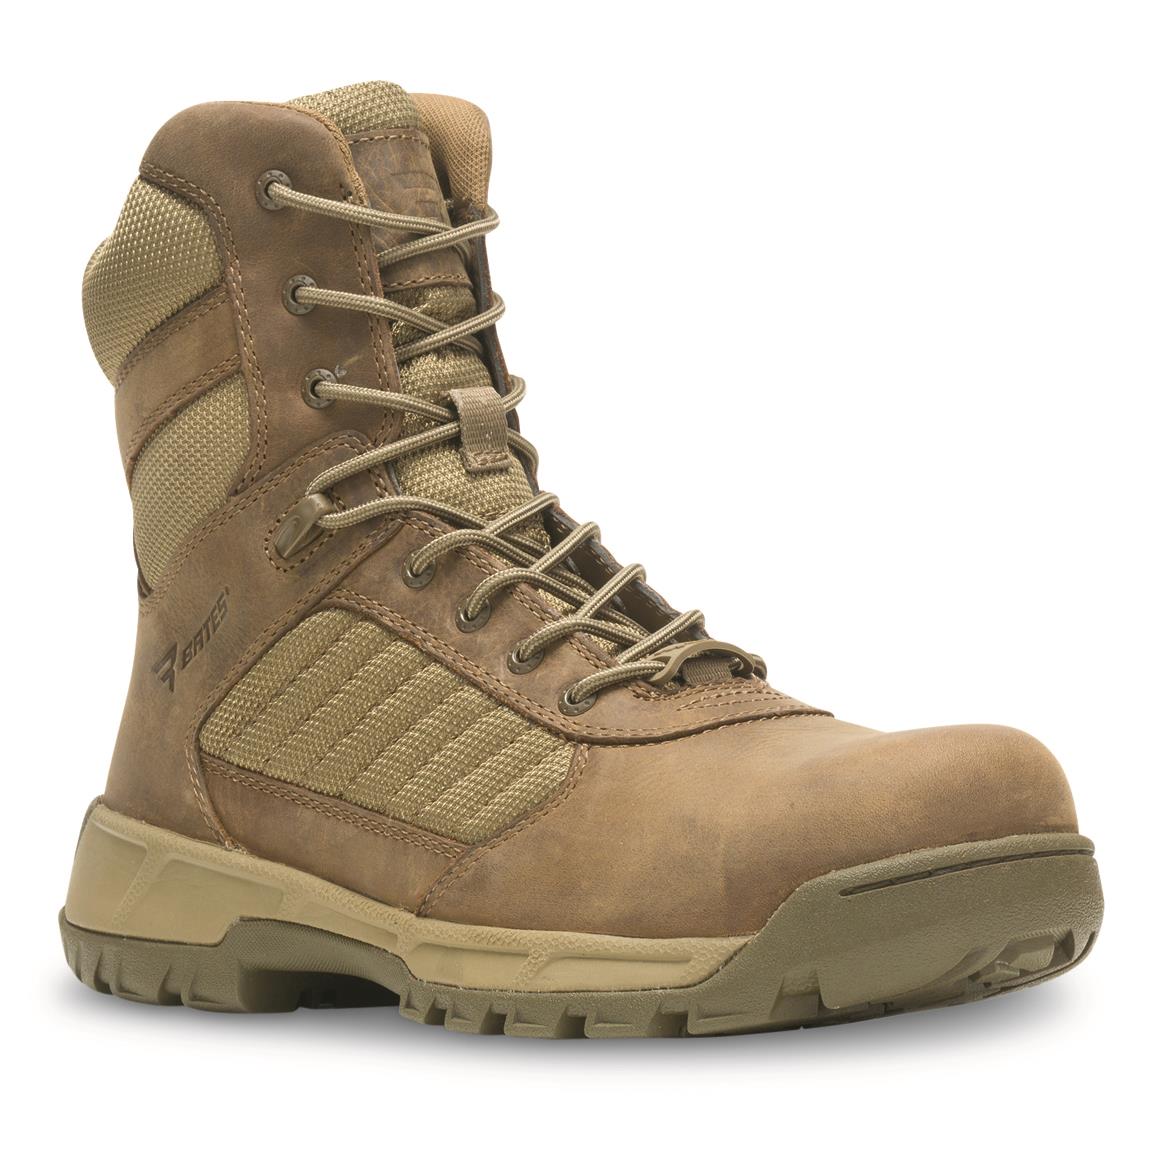 Bates Tactical Sport 2 Tall Side-Zip Composite Toe Tactical Boots, Coyote Brown